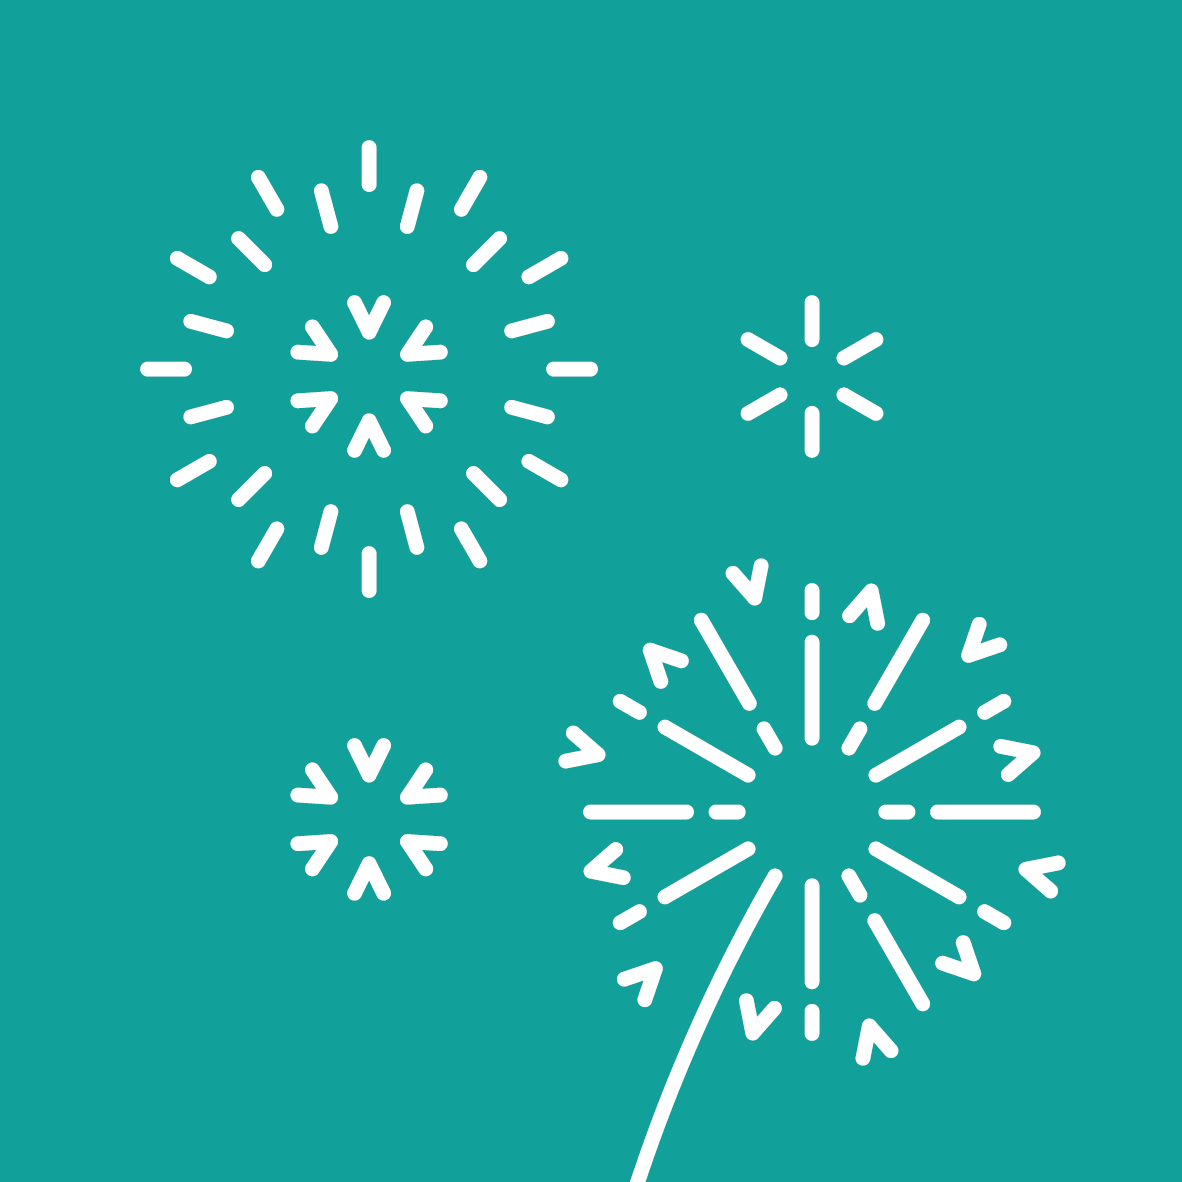 Four graphic images representing exploding fireworks in varying sizes, composed of arrows and lines, The firework bursts are white on a teal-coloured background.